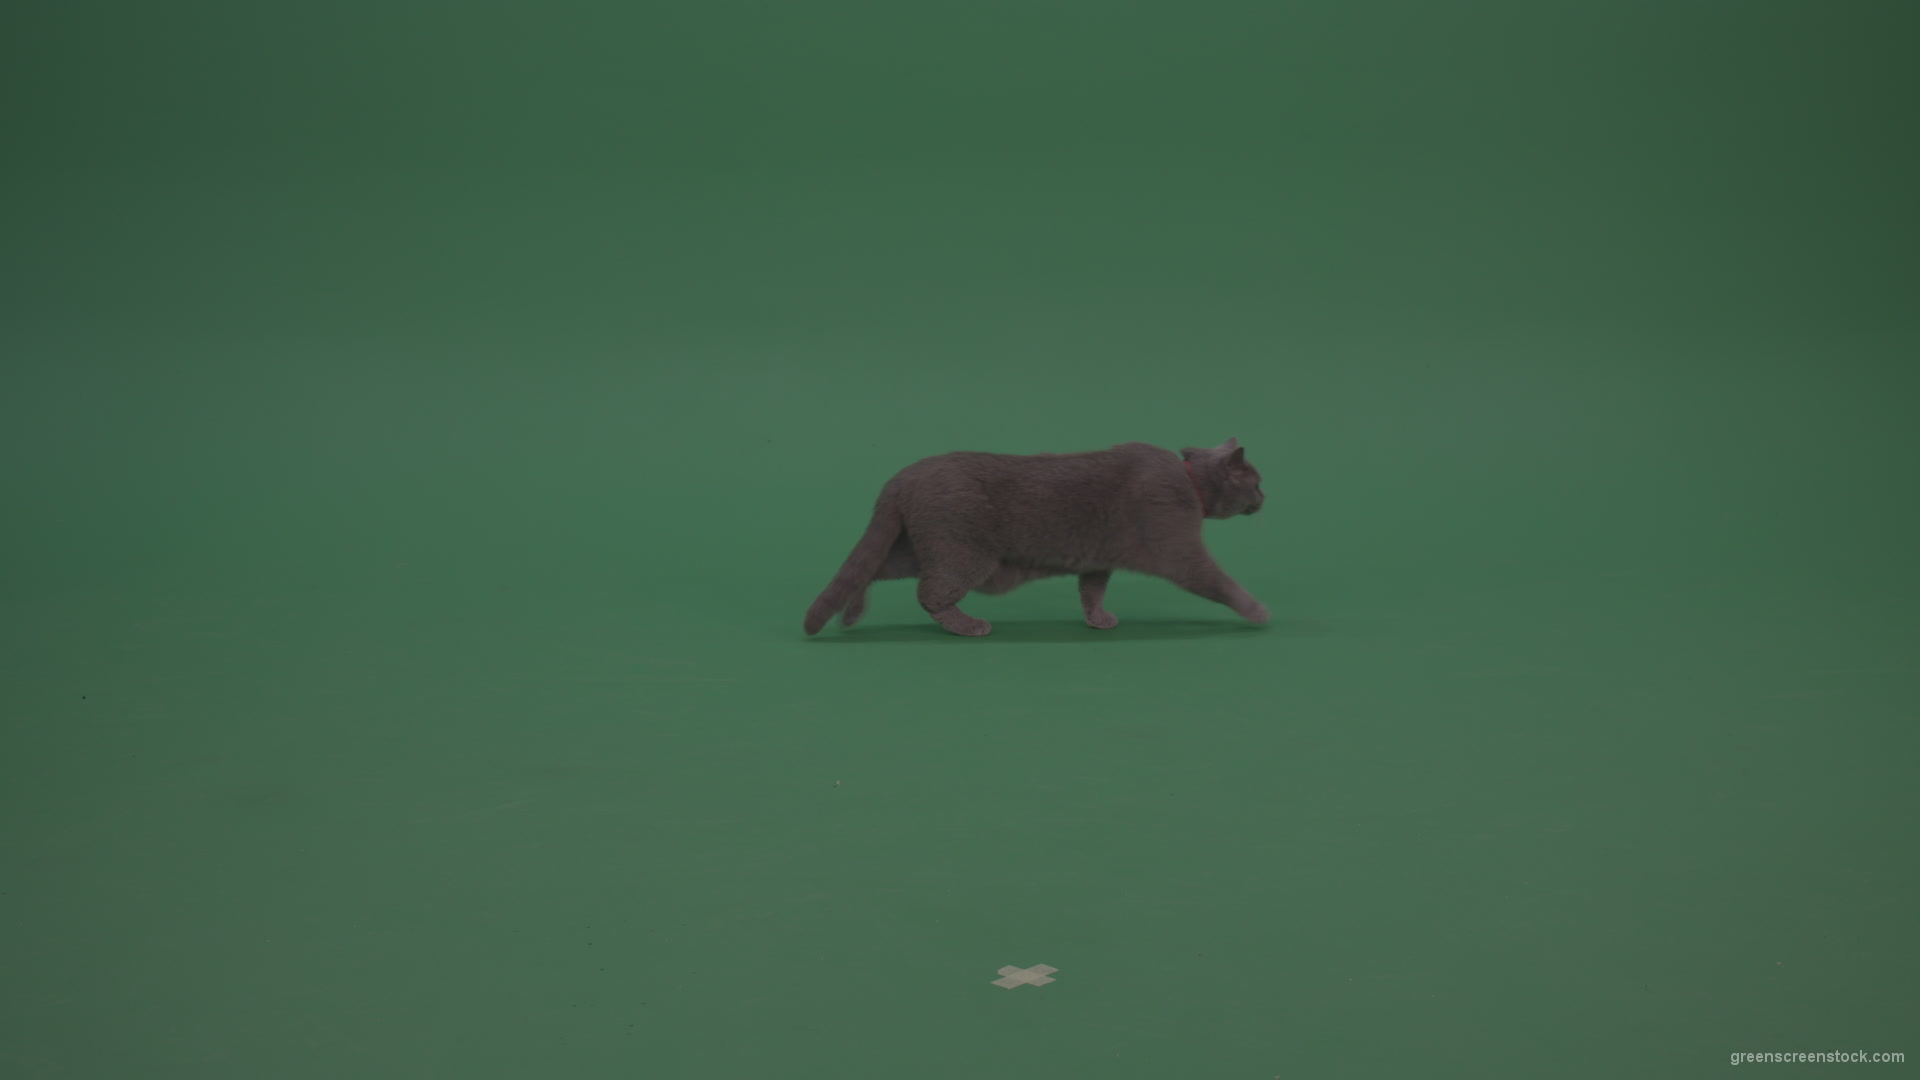 British-Cat-Crawling-Learning-Territory-Looking-Around-Then-Walking-Away-On-Green-Screen-Wall-Green-Screen-Background_008 Green Screen Stock